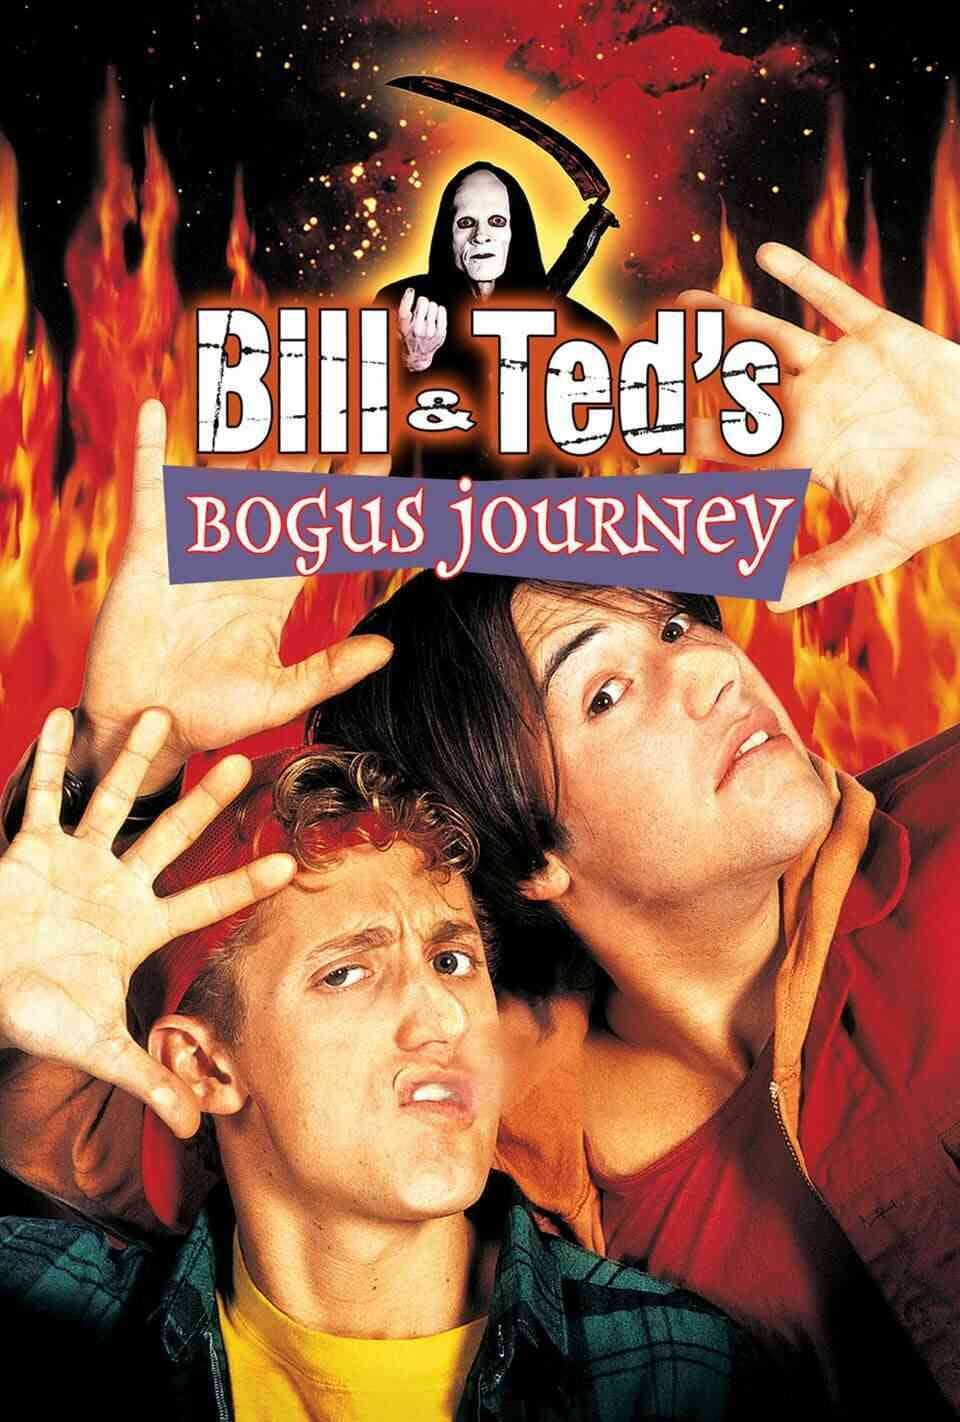 Read Bill & Ted's Bogus Journey screenplay.